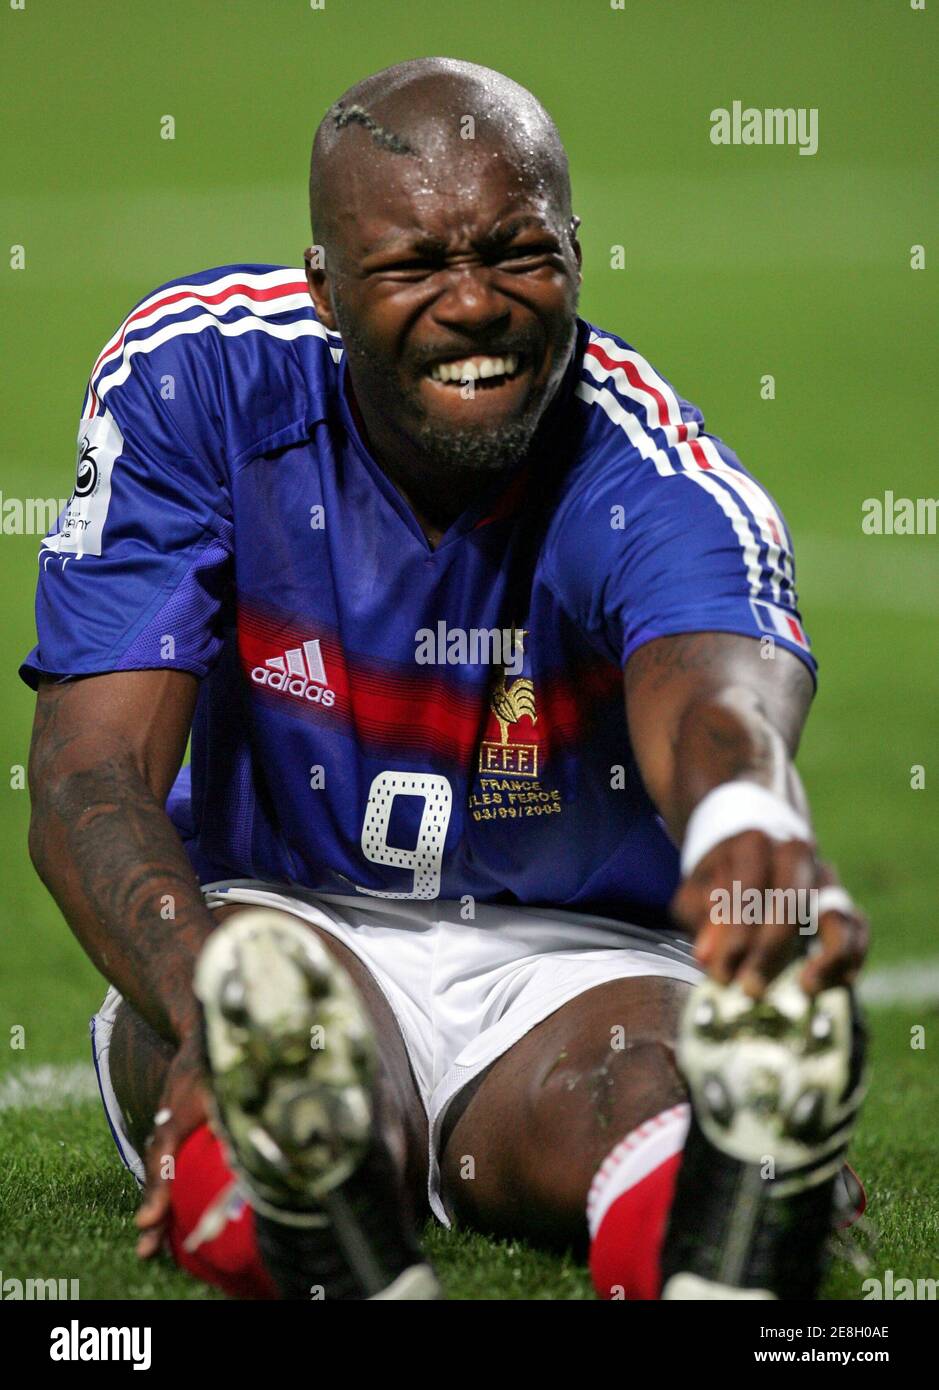 Djibril Cisse of France grimaces during the World Cup 2006 Group Four  qualifying soccer match against the [Faroe Islands] at Bollaert stadium in  Lens September 3, 2005. France won 3-0 Stock Photo - Alamy